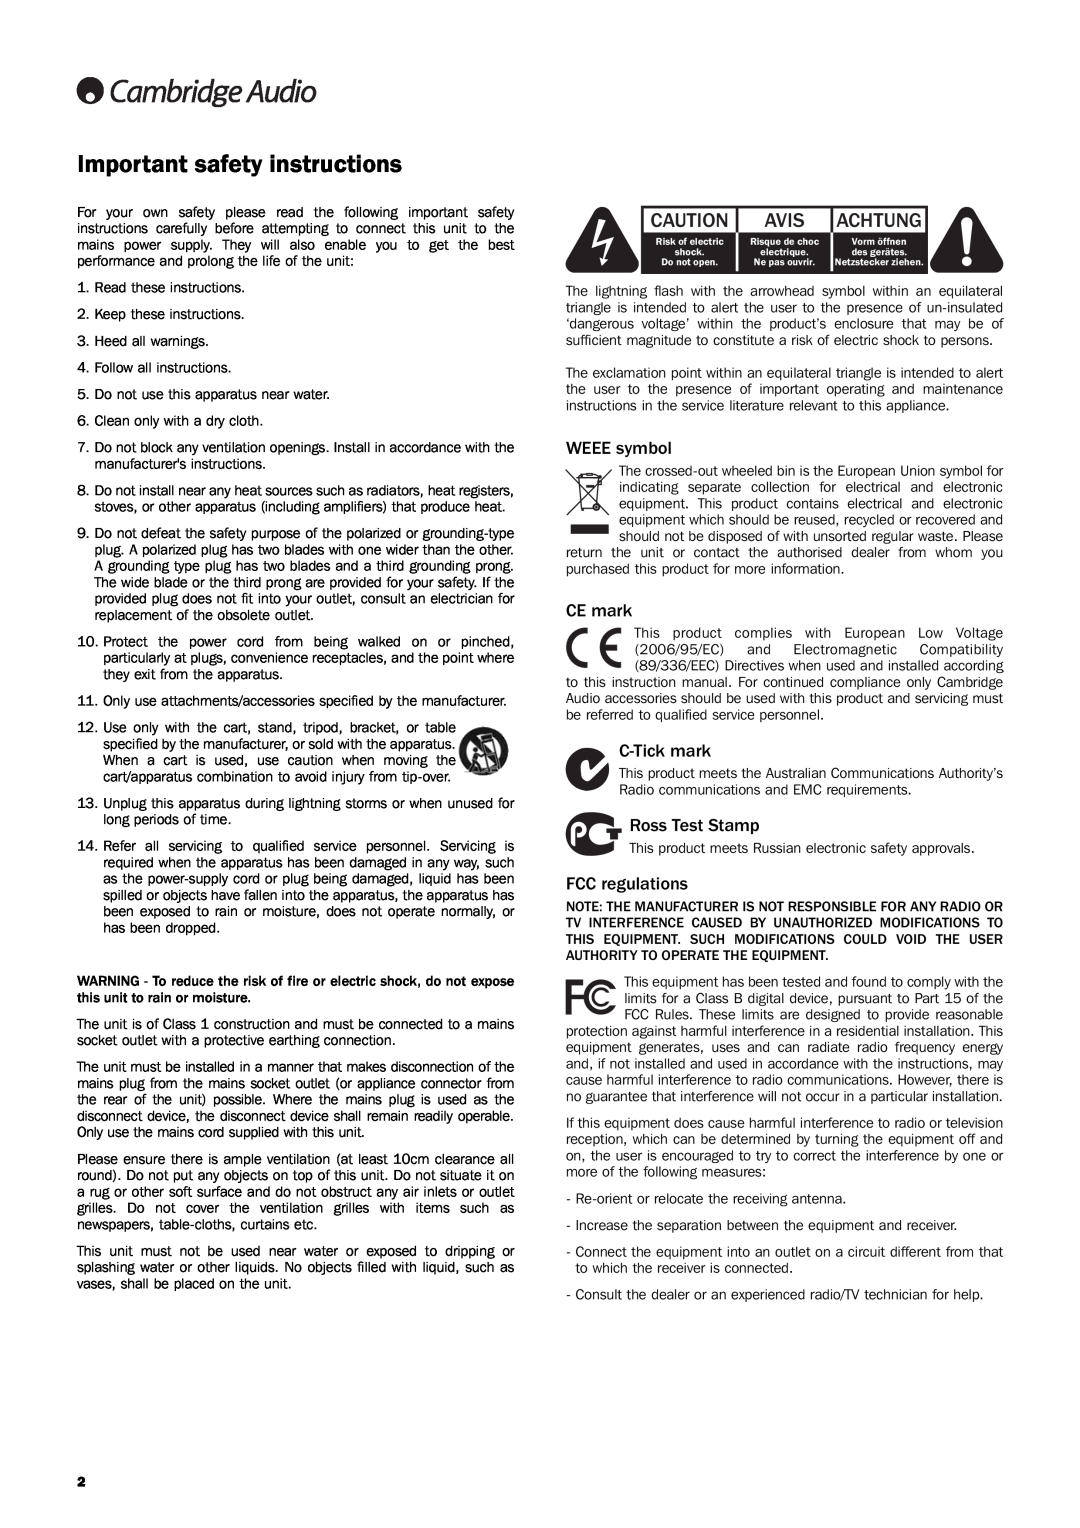 Cambridge Audio 840A V2 user manual Important safety instructions, Avis, Achtung 